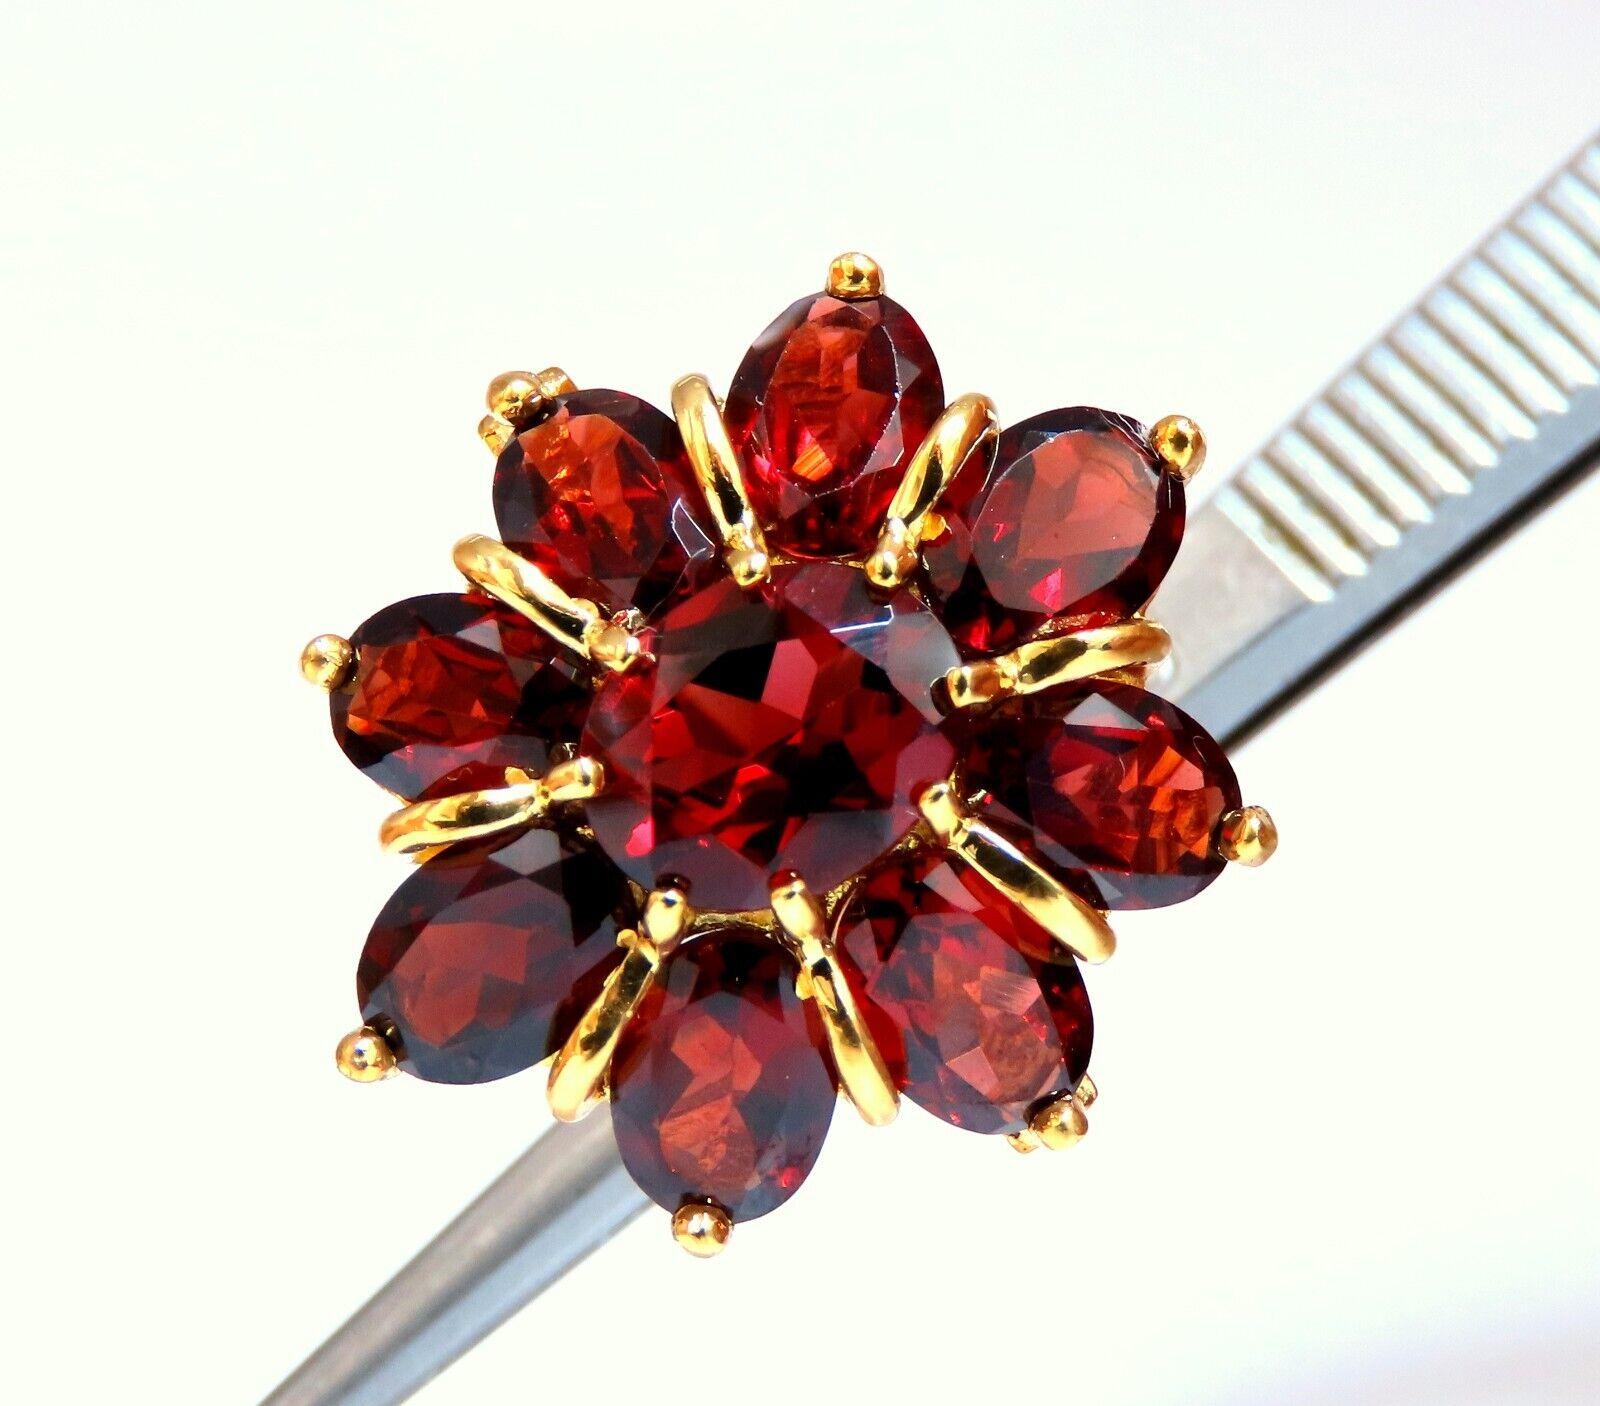 10 carat natural oval-shaped garnets cluster ring.

Clean clarity, crimson red colors.

Deck of ring 23x21 mm

Depth of ring 6 mm

10 karat yellow gold, 5.5 g

Current size 6.75 and we may resize, please inquire.